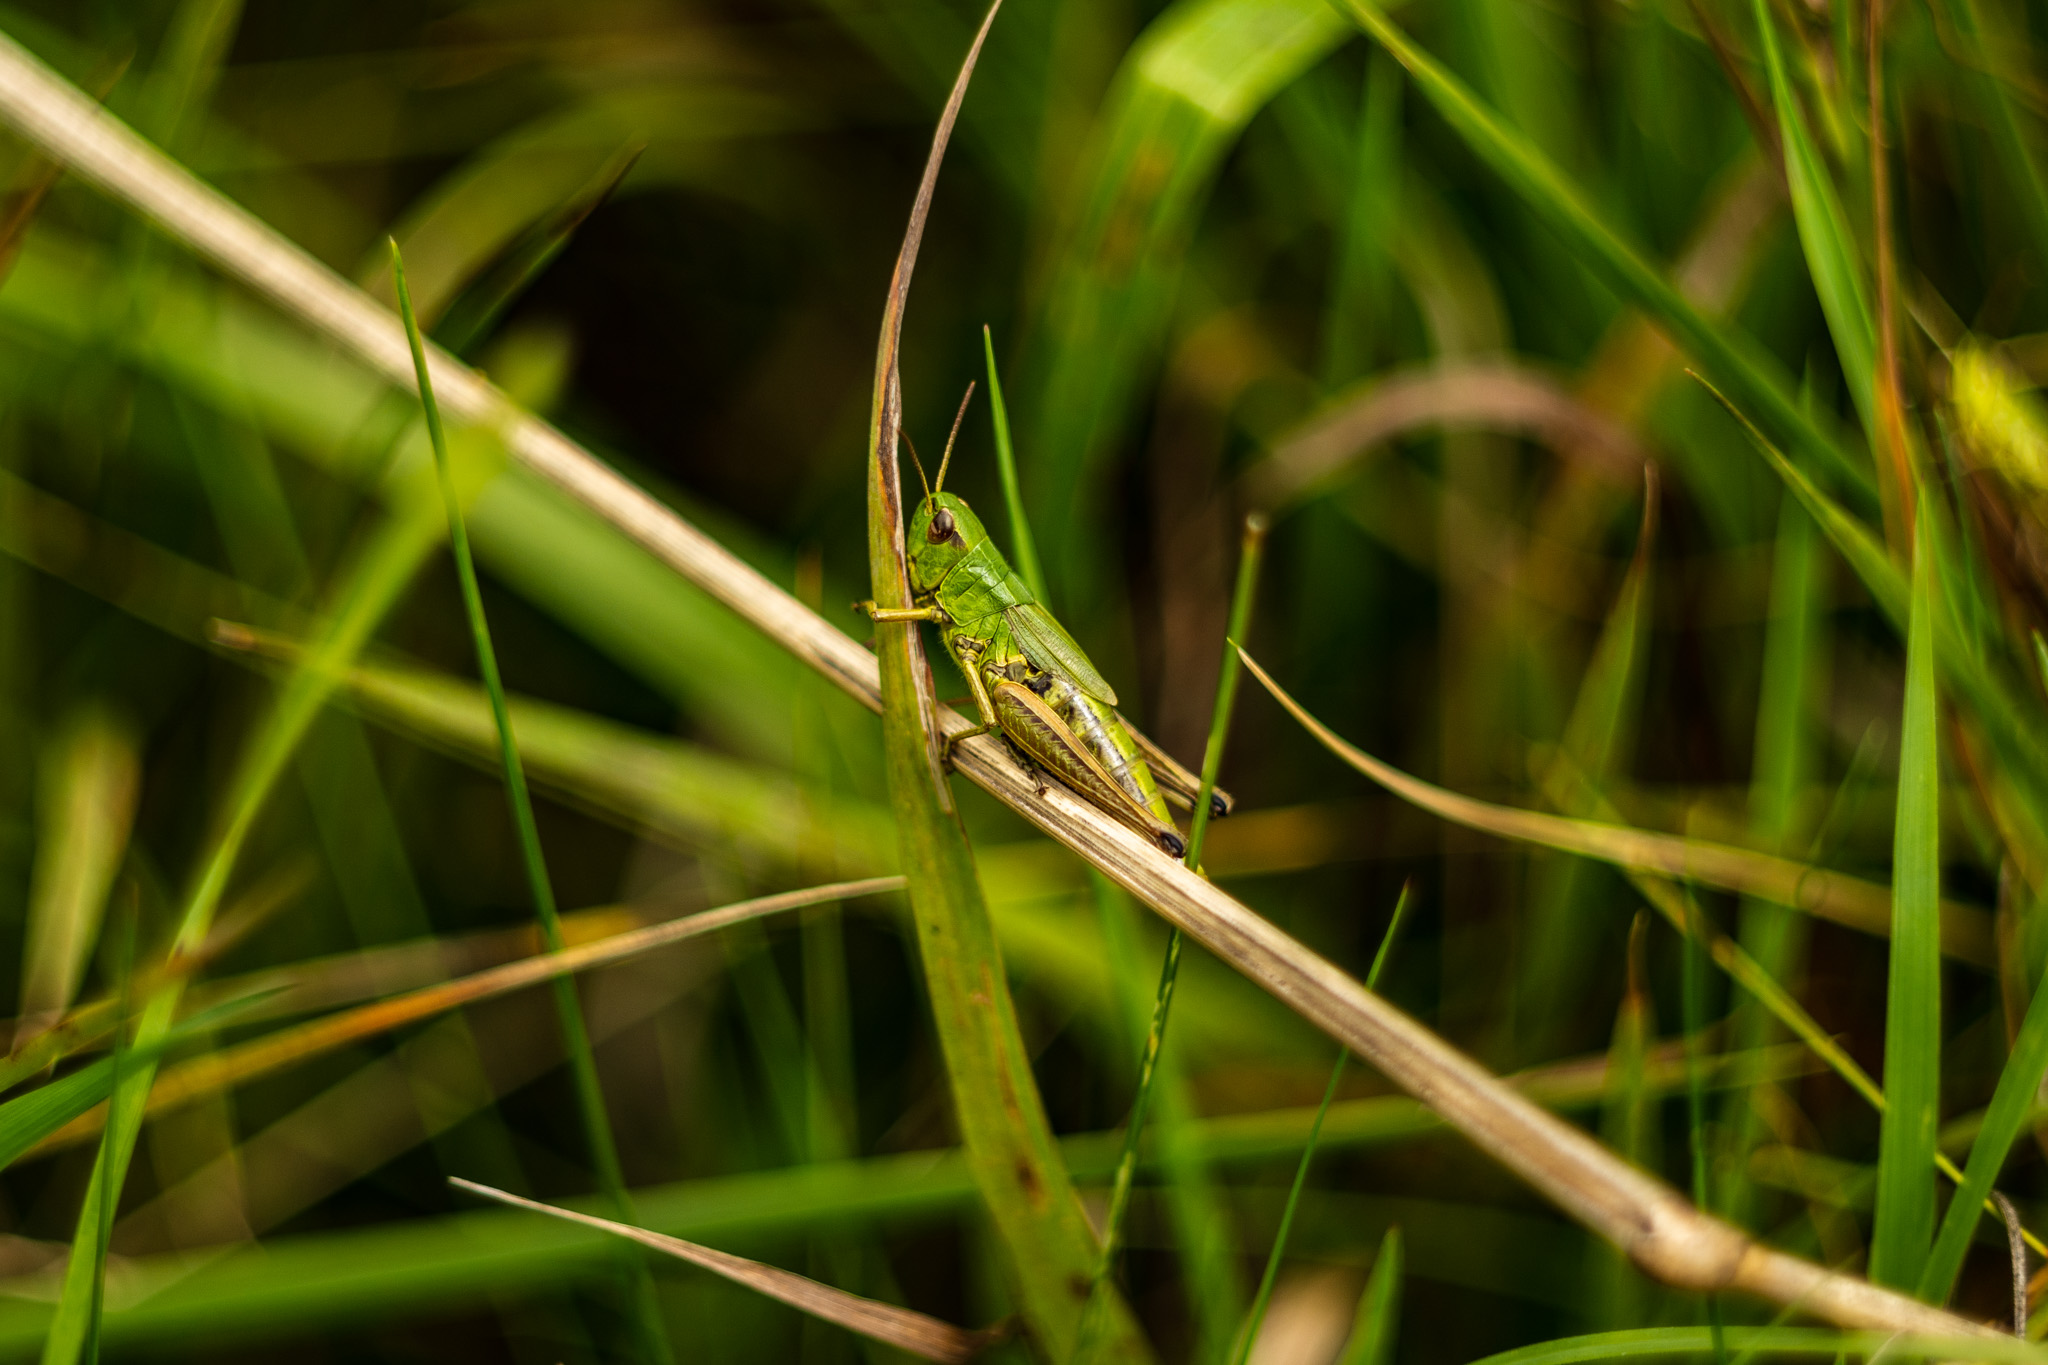 In a field full of long grass, we stumbled upon a solitary grasshopper.